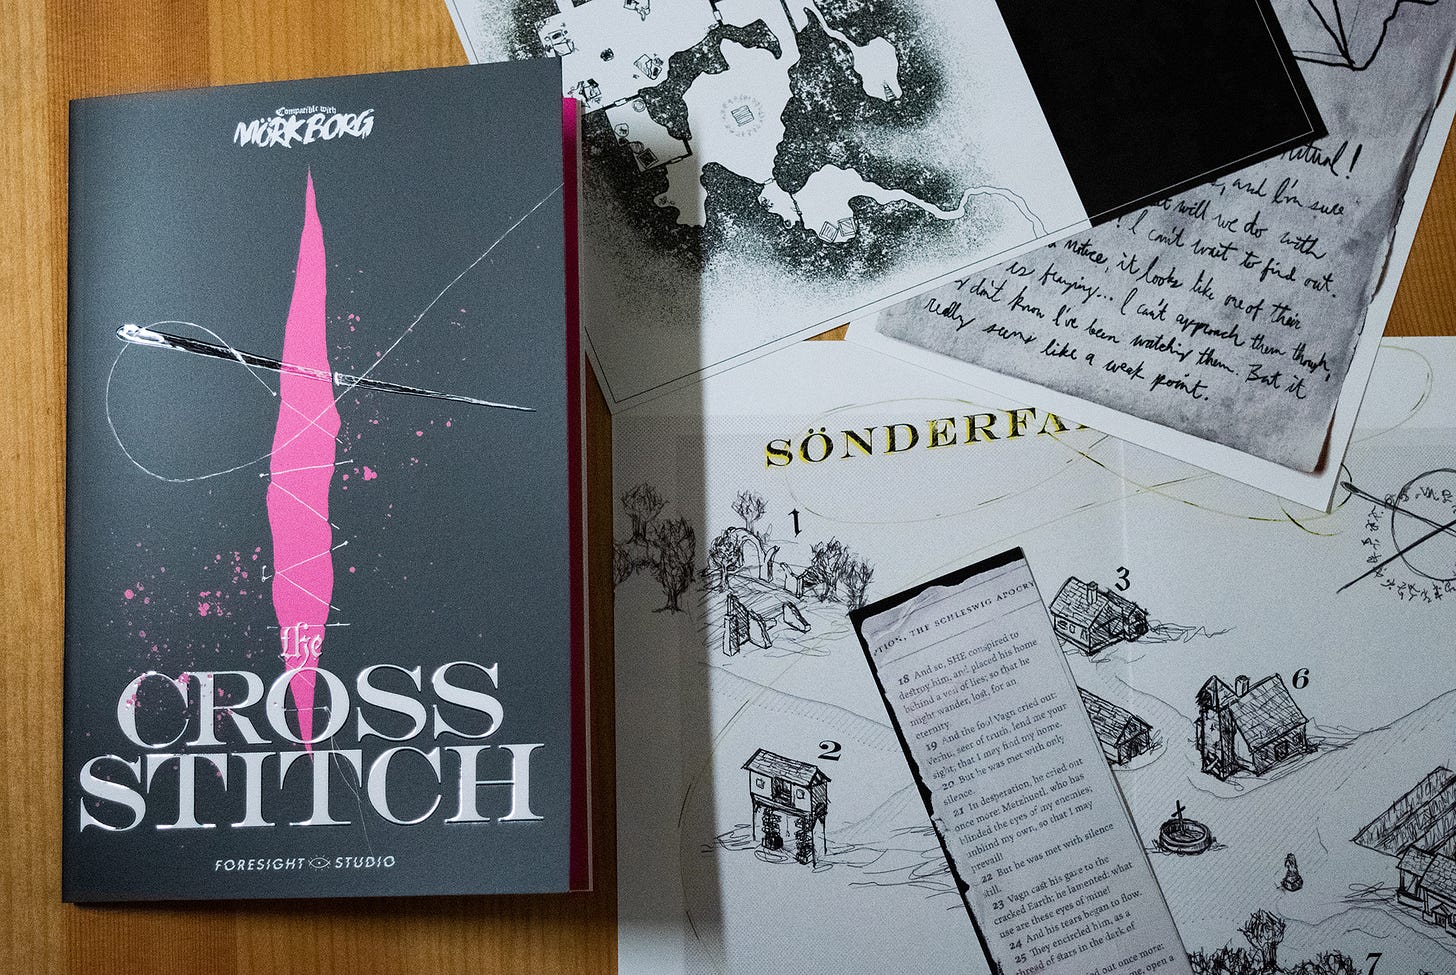 A photograph of a zine on a table, closed with the cover facing up on the left side of the image. The cover is black with a magenta wound going from top to bottom, and a white needle suturing the wound shut. At the bottom of the cover are the words "the Cross Stitch" in white. On the right side of the image, there are several scattered maps and notes that come packaged with the zine.